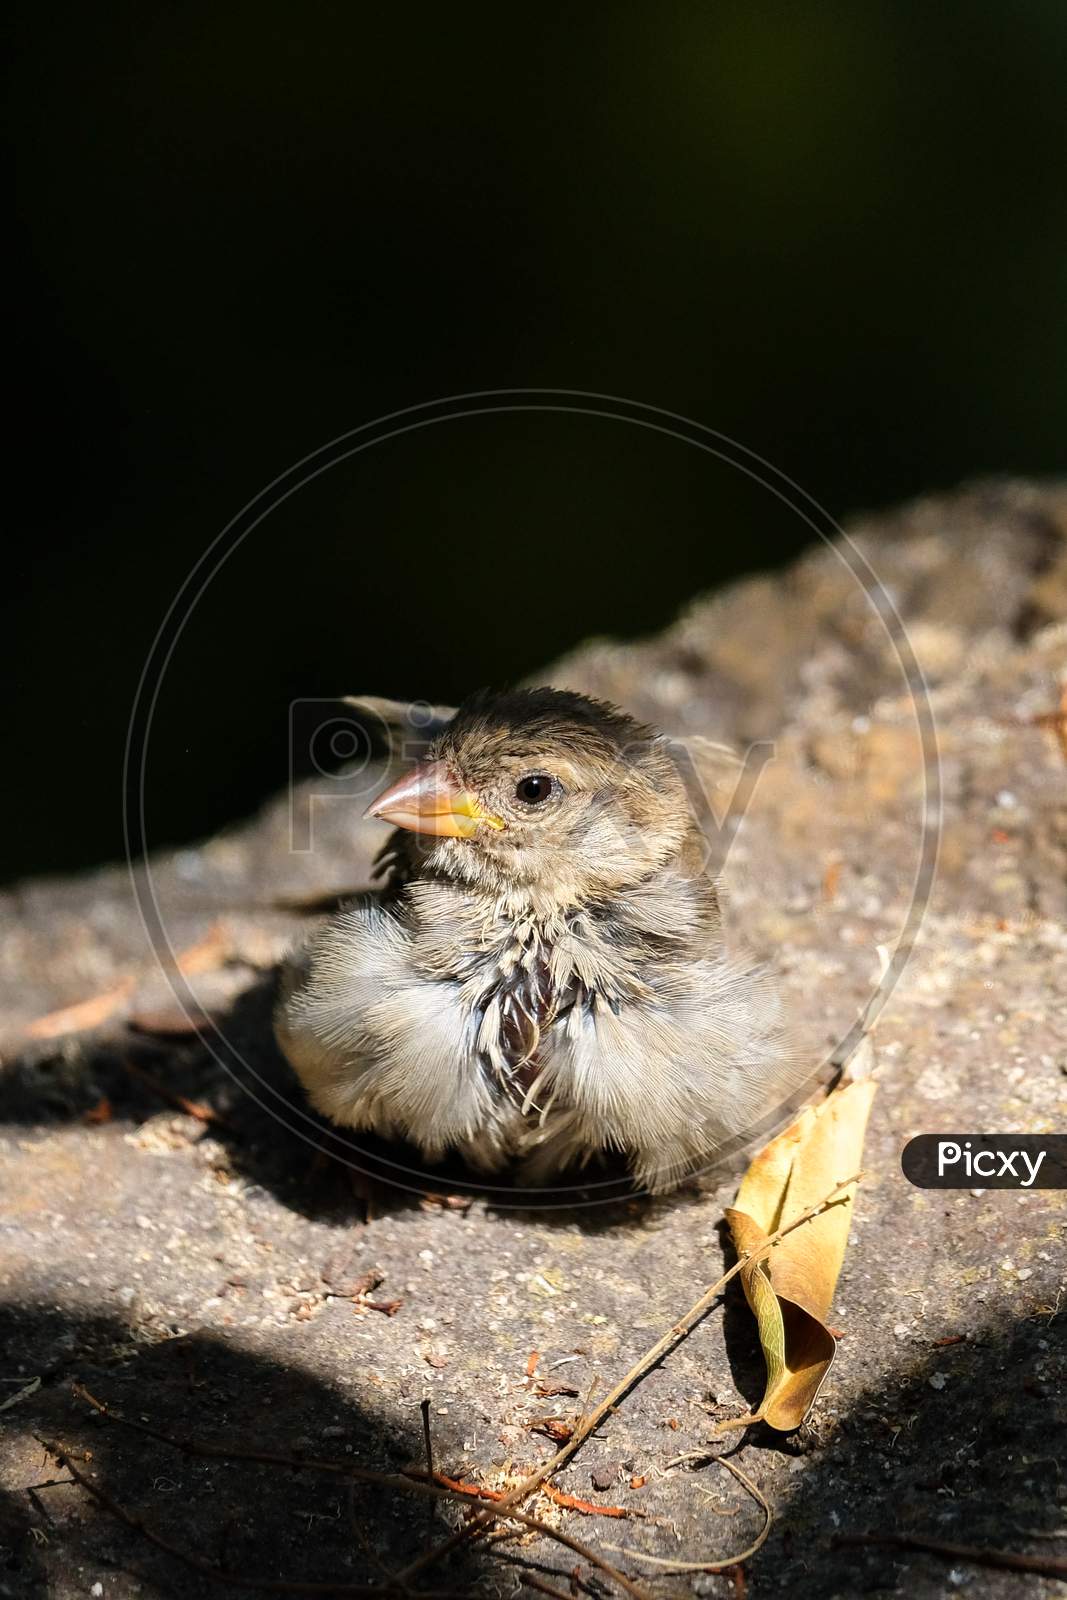 Baby Sparrow (Passeridae) Resting On A Rock In The Sunshine